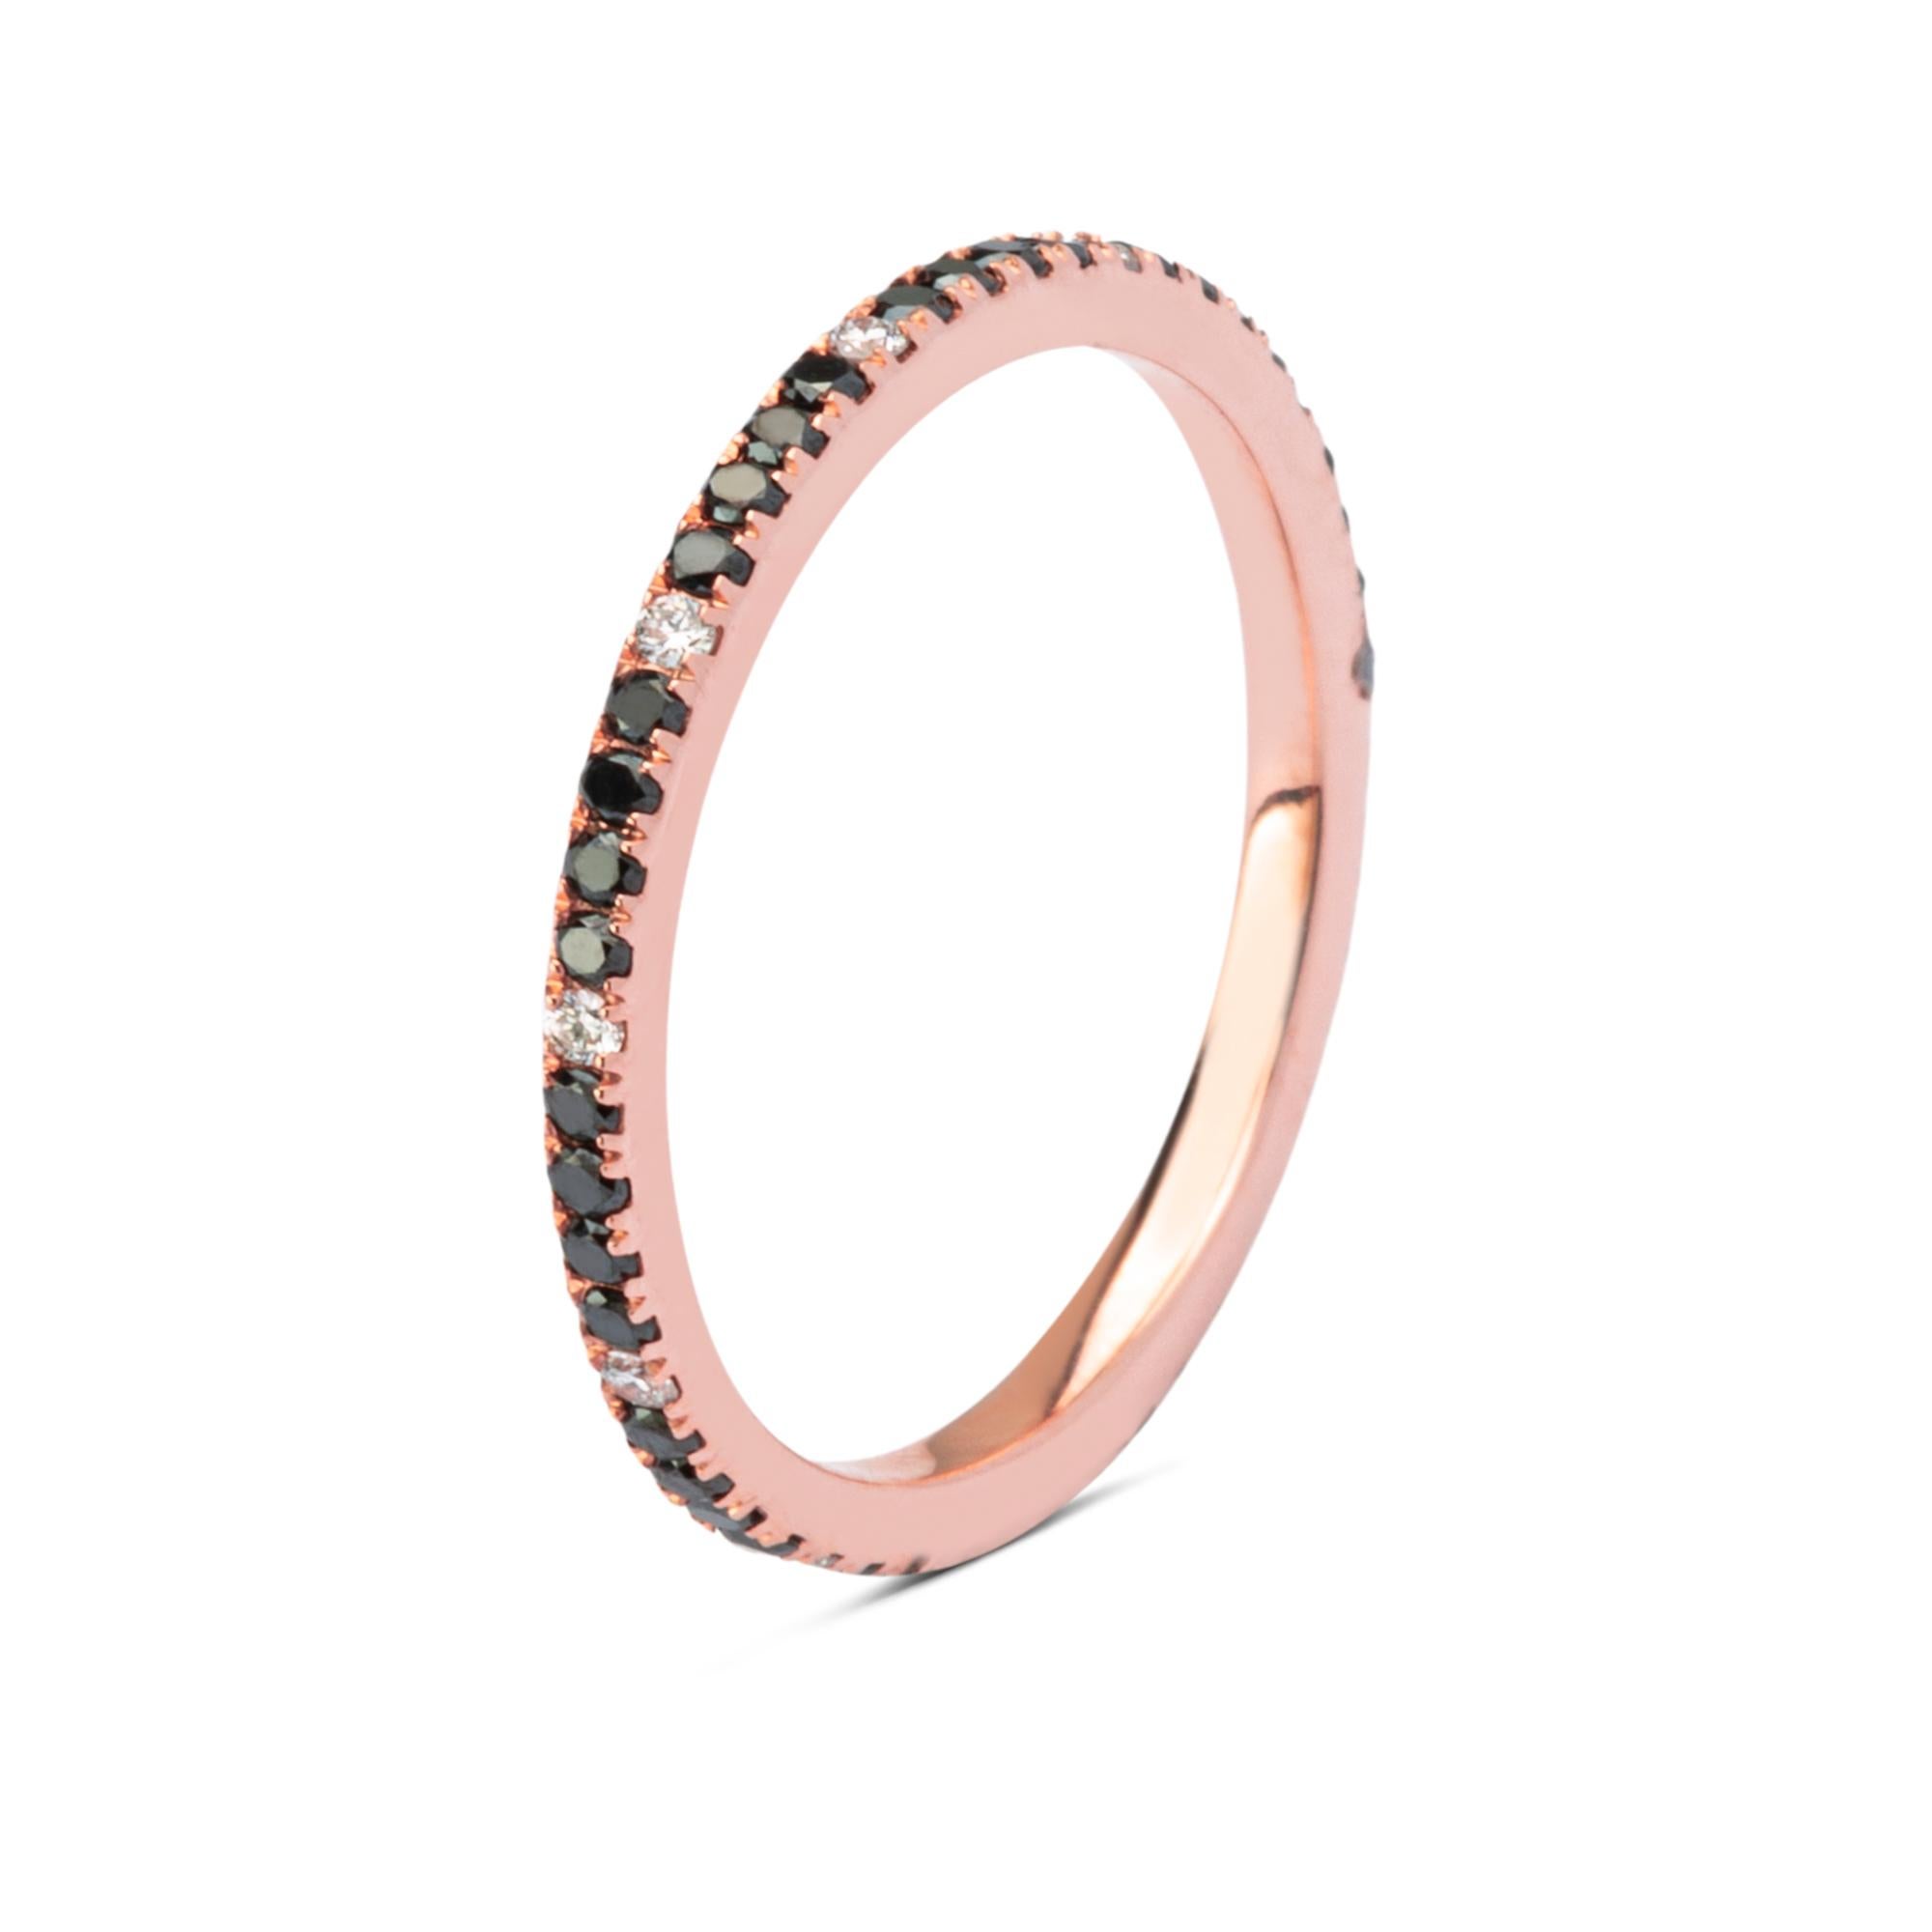 Alex Jona design collection, hand crafted in Italy, 18 karat rose gold ring, set with 0.27 carats of black diamonds and 0.05 carats of white diamonds. 
Ring size US. 6.2, can be sized to any specification or made to order specially for you in all